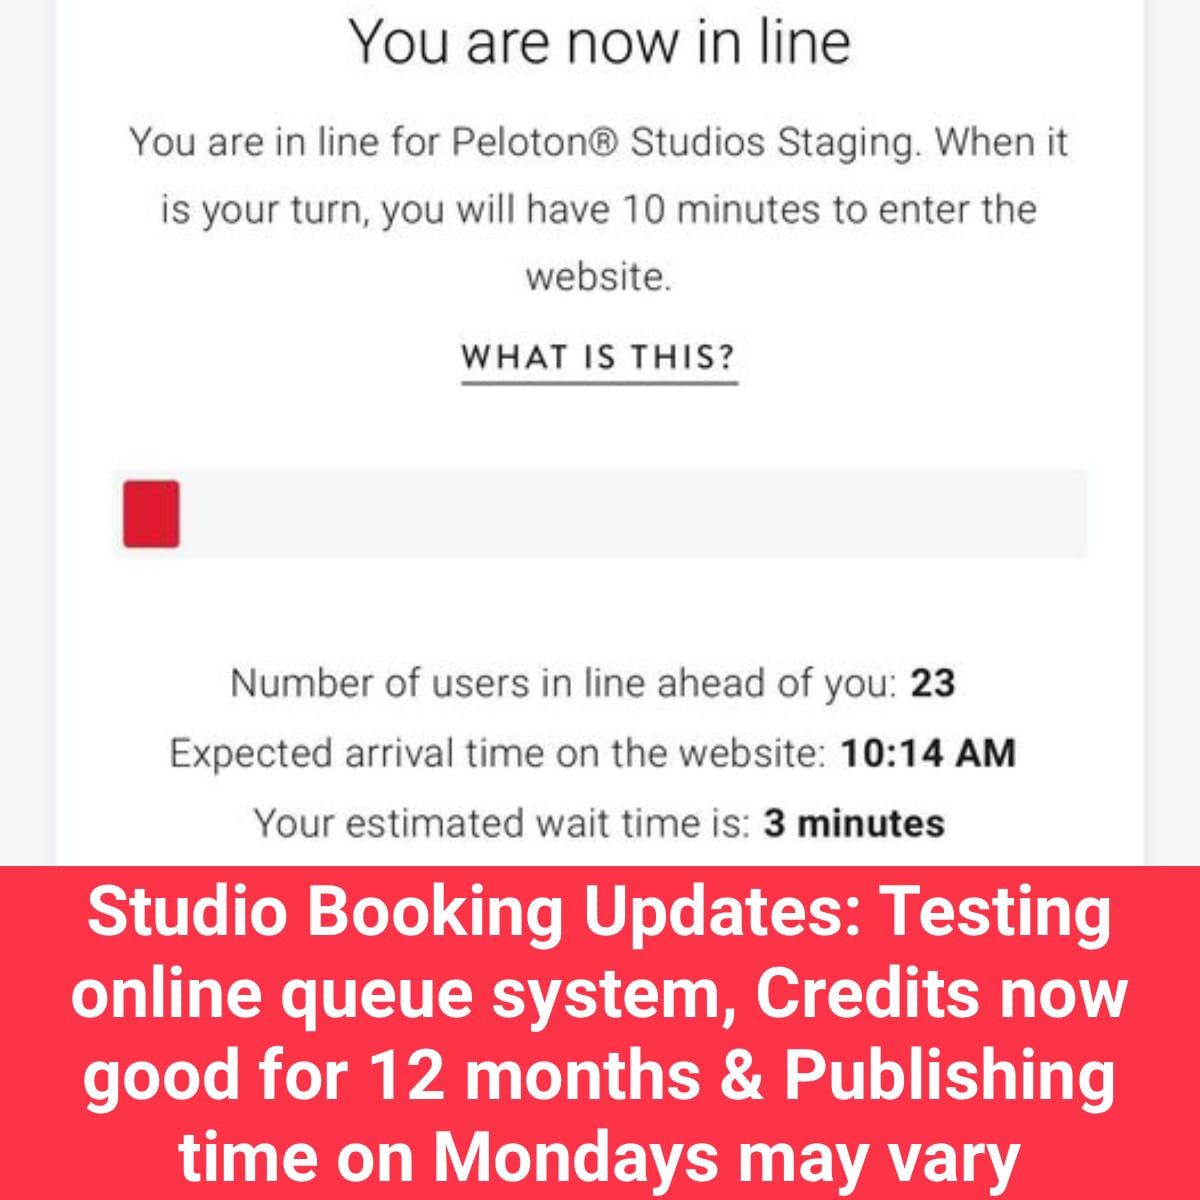 Studio Booking Updates Peloton testing online queue system, Credits now good for 12 months and Publishing time on Mondays may vary